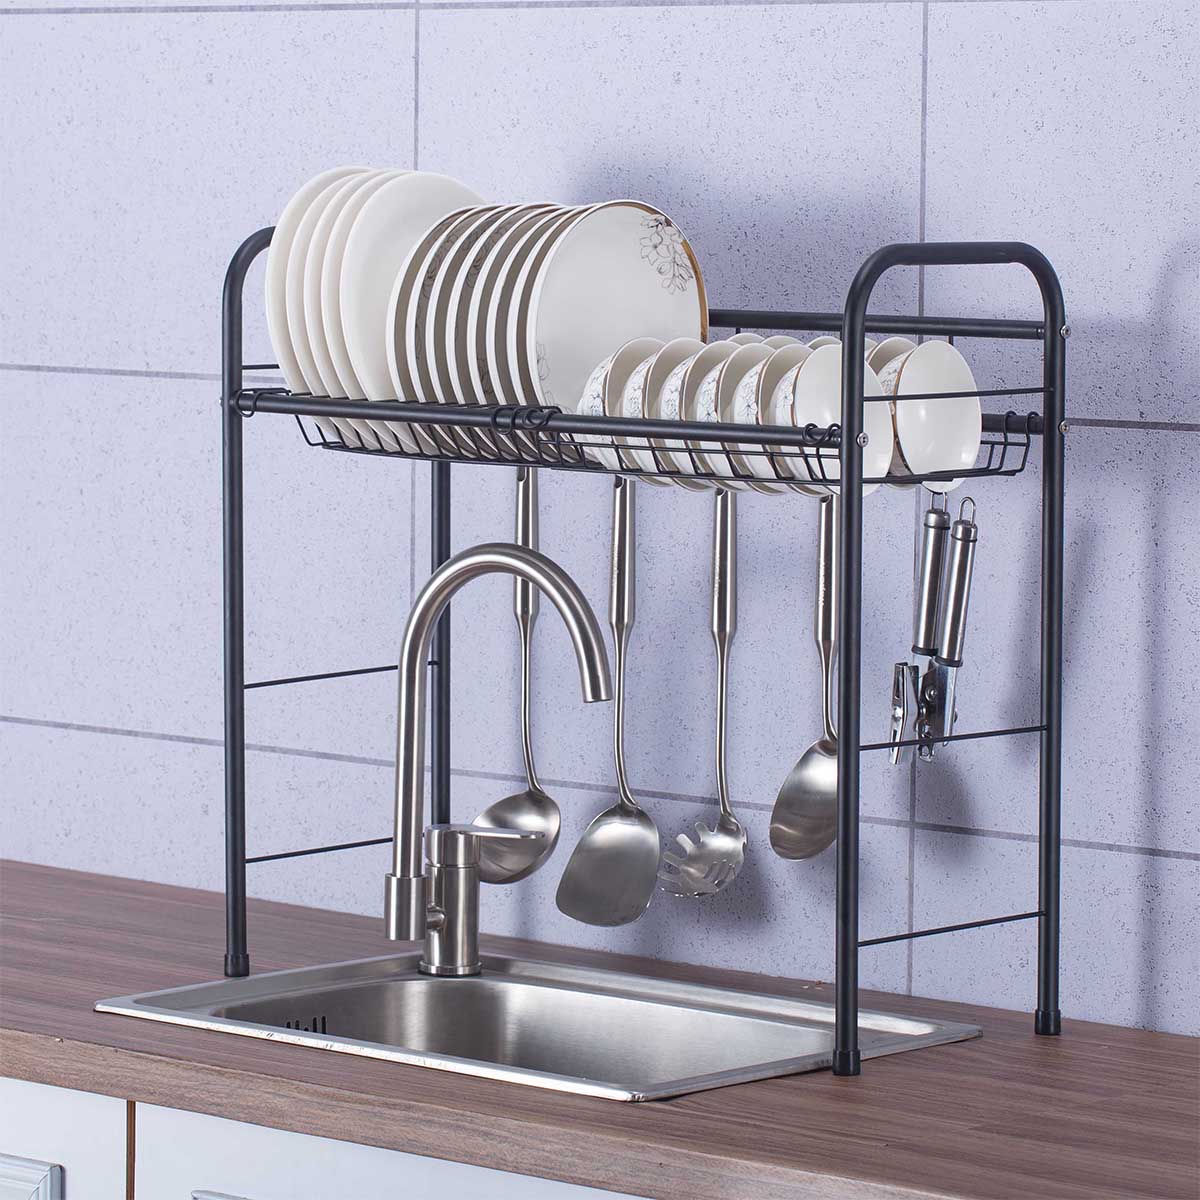 Other Hardware Accessories Stainless Steel Over Sink Kitchen Dish Rack Drying Drainer Tray